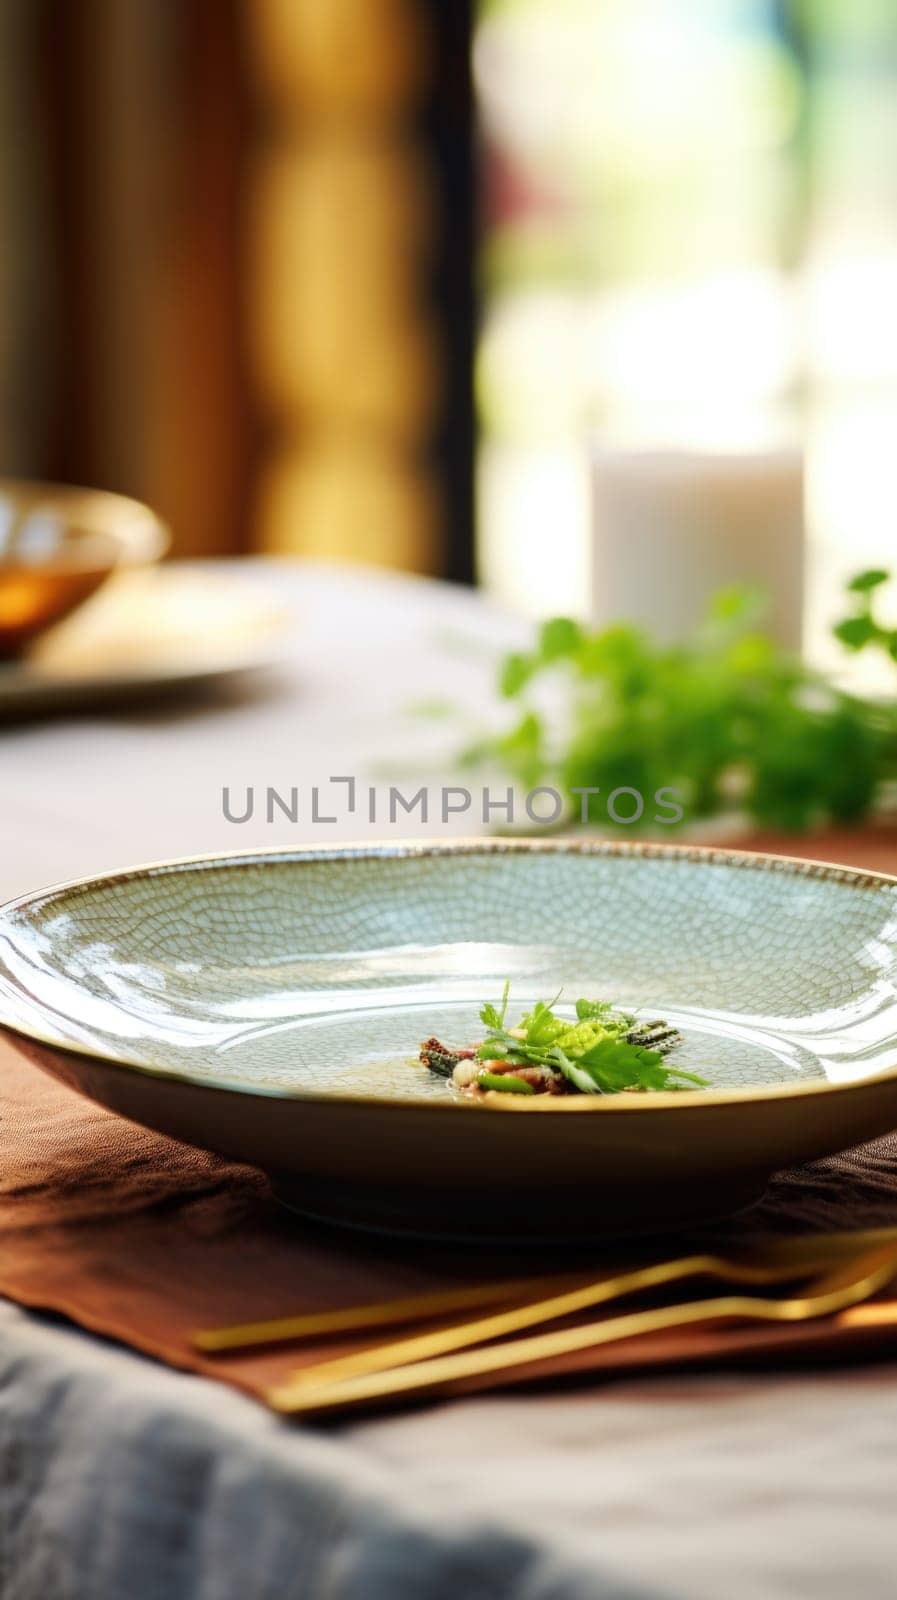 A plate with a green leaf on it sits on a table, AI by starush